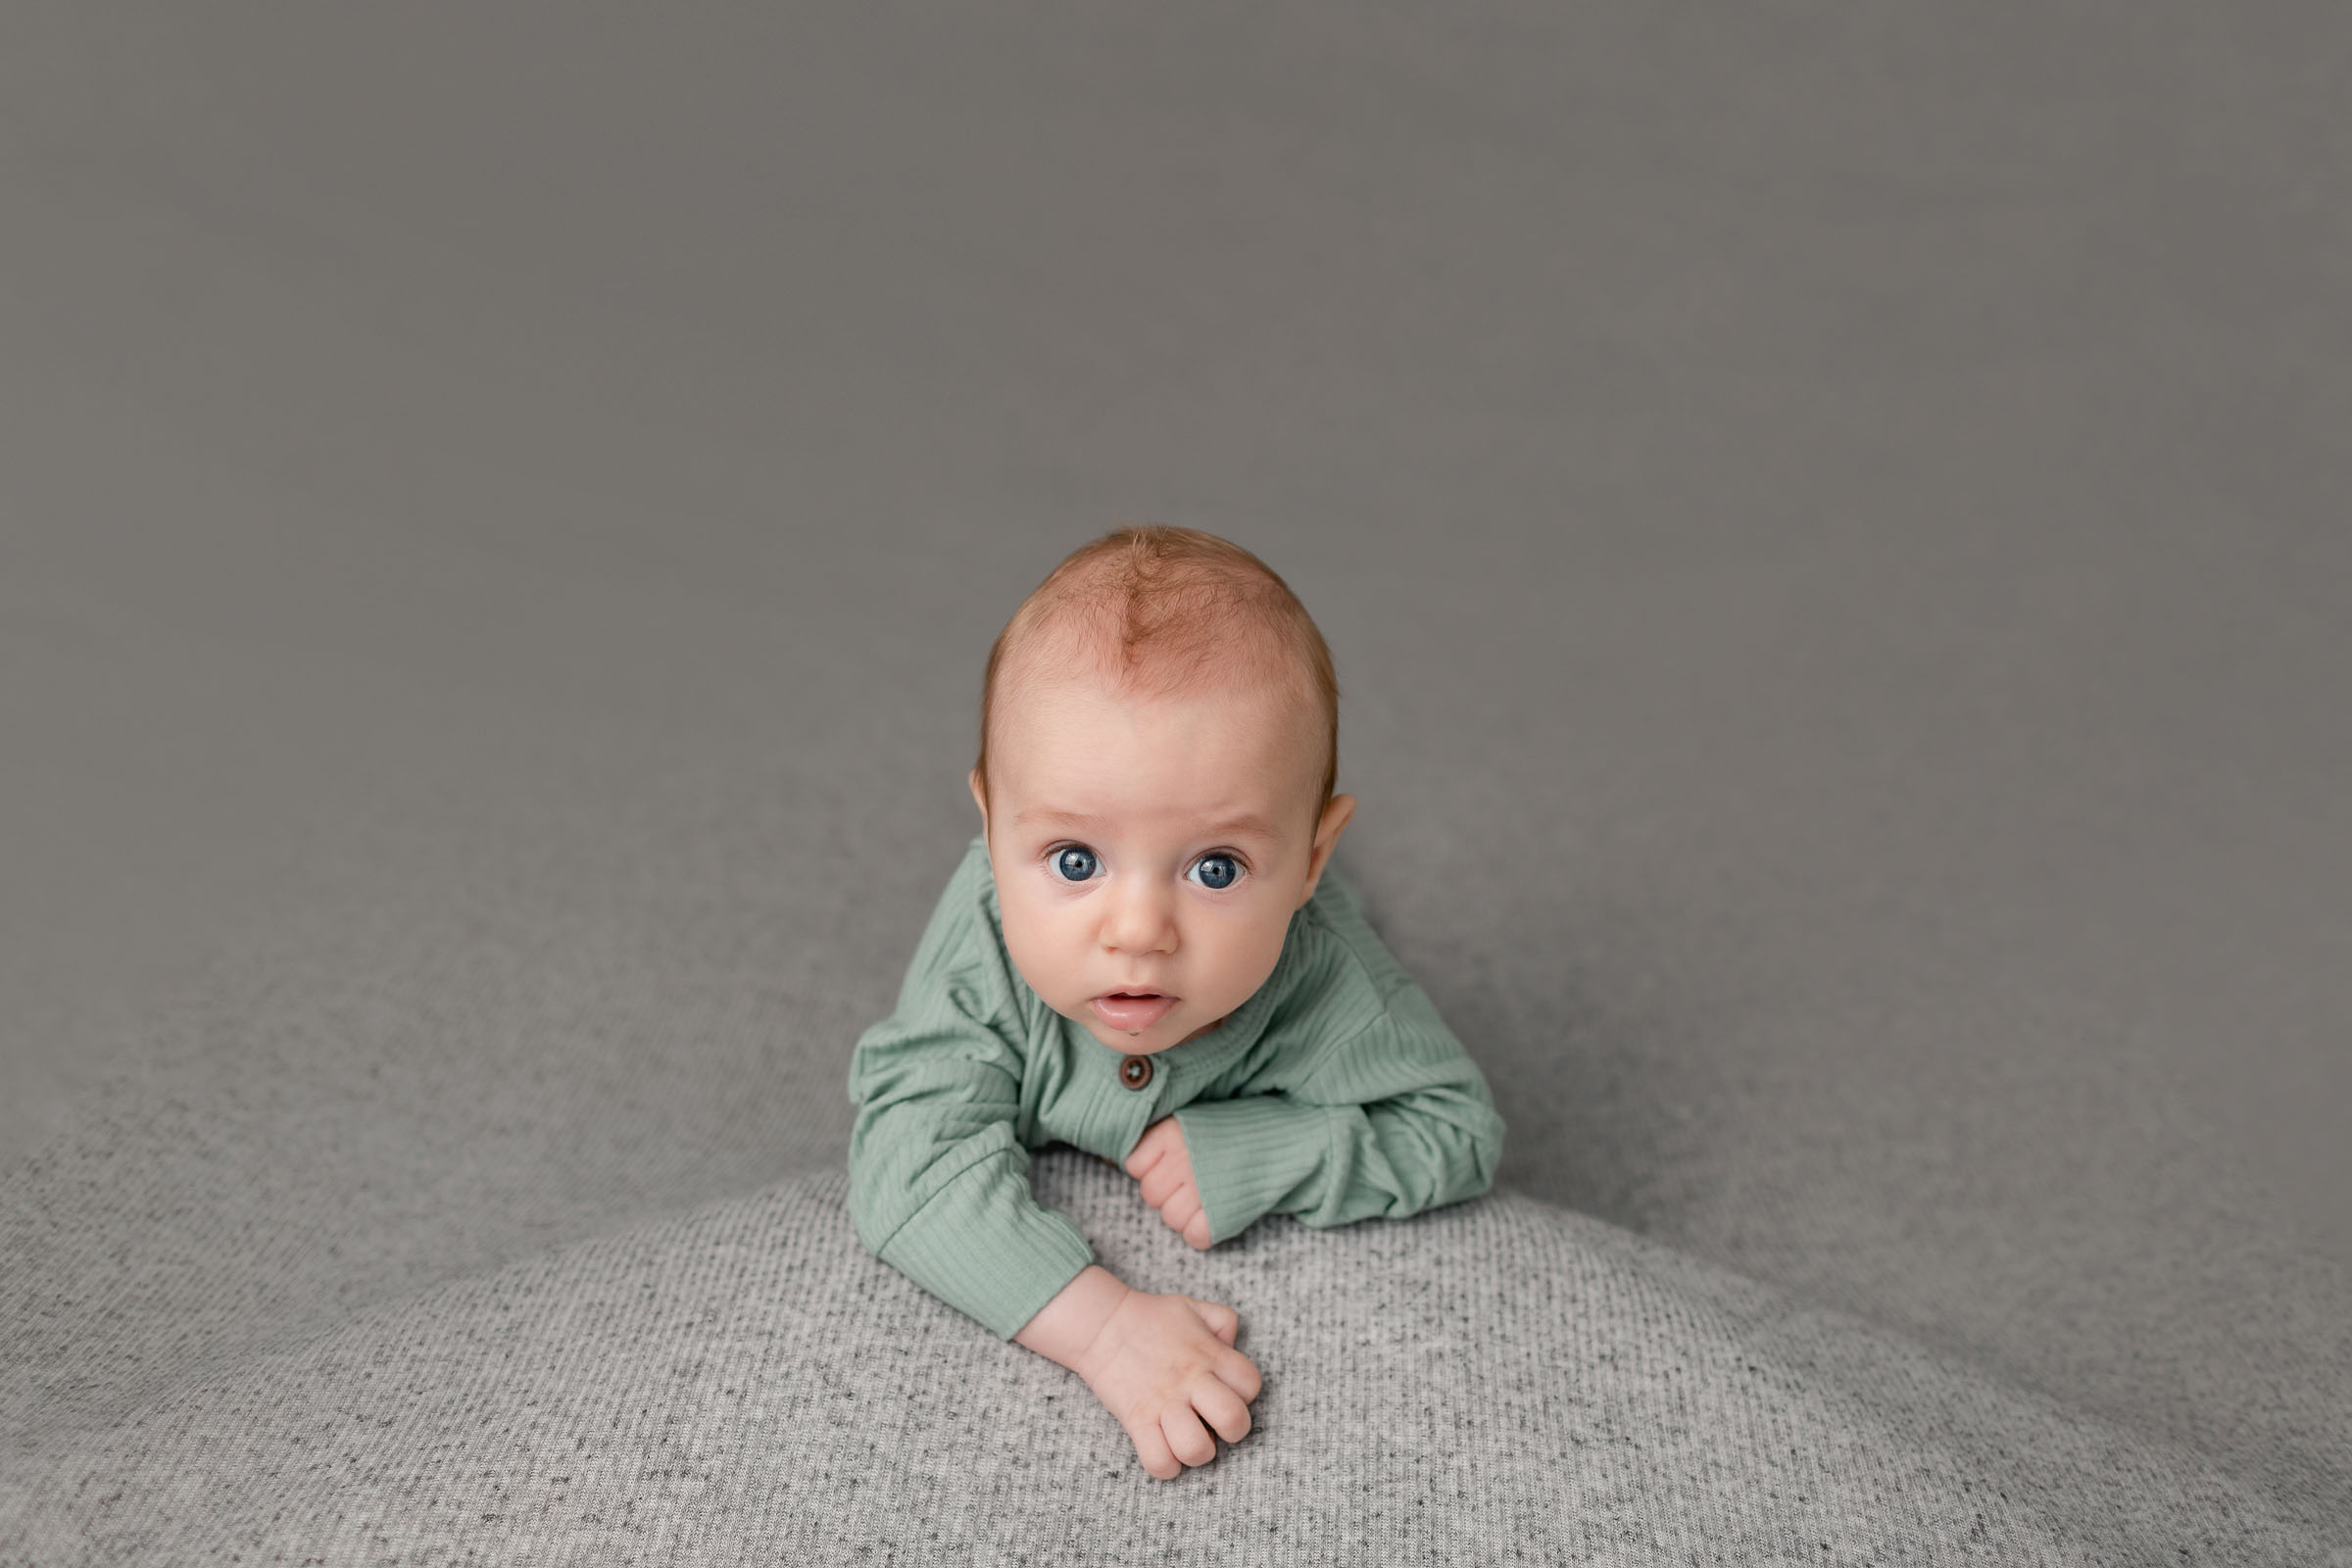 3 month milestone image for baby in green on gray backdrop